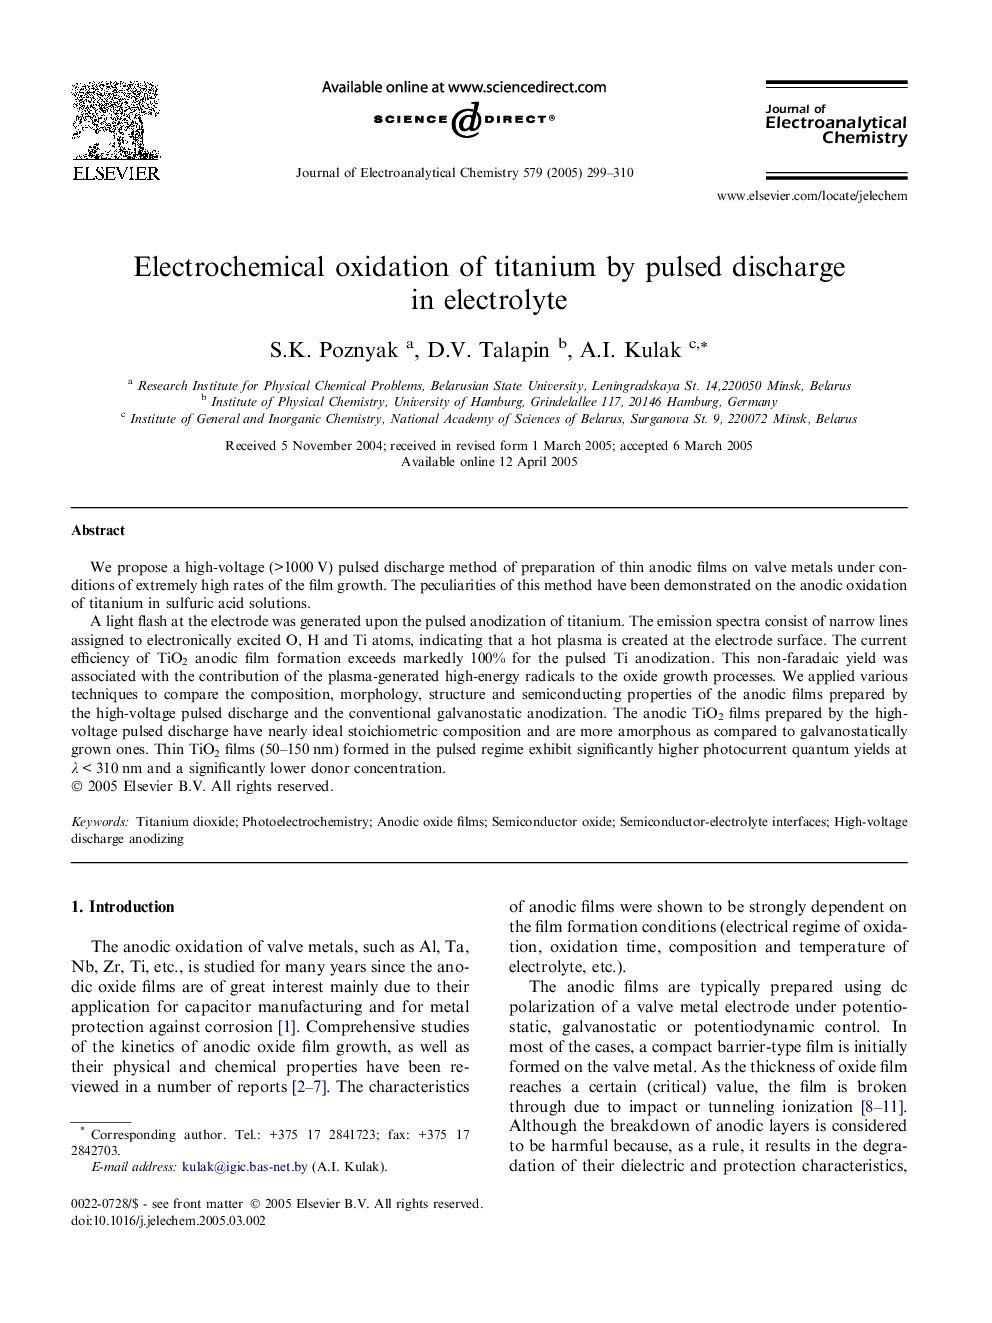 Electrochemical oxidation of titanium by pulsed discharge in electrolyte